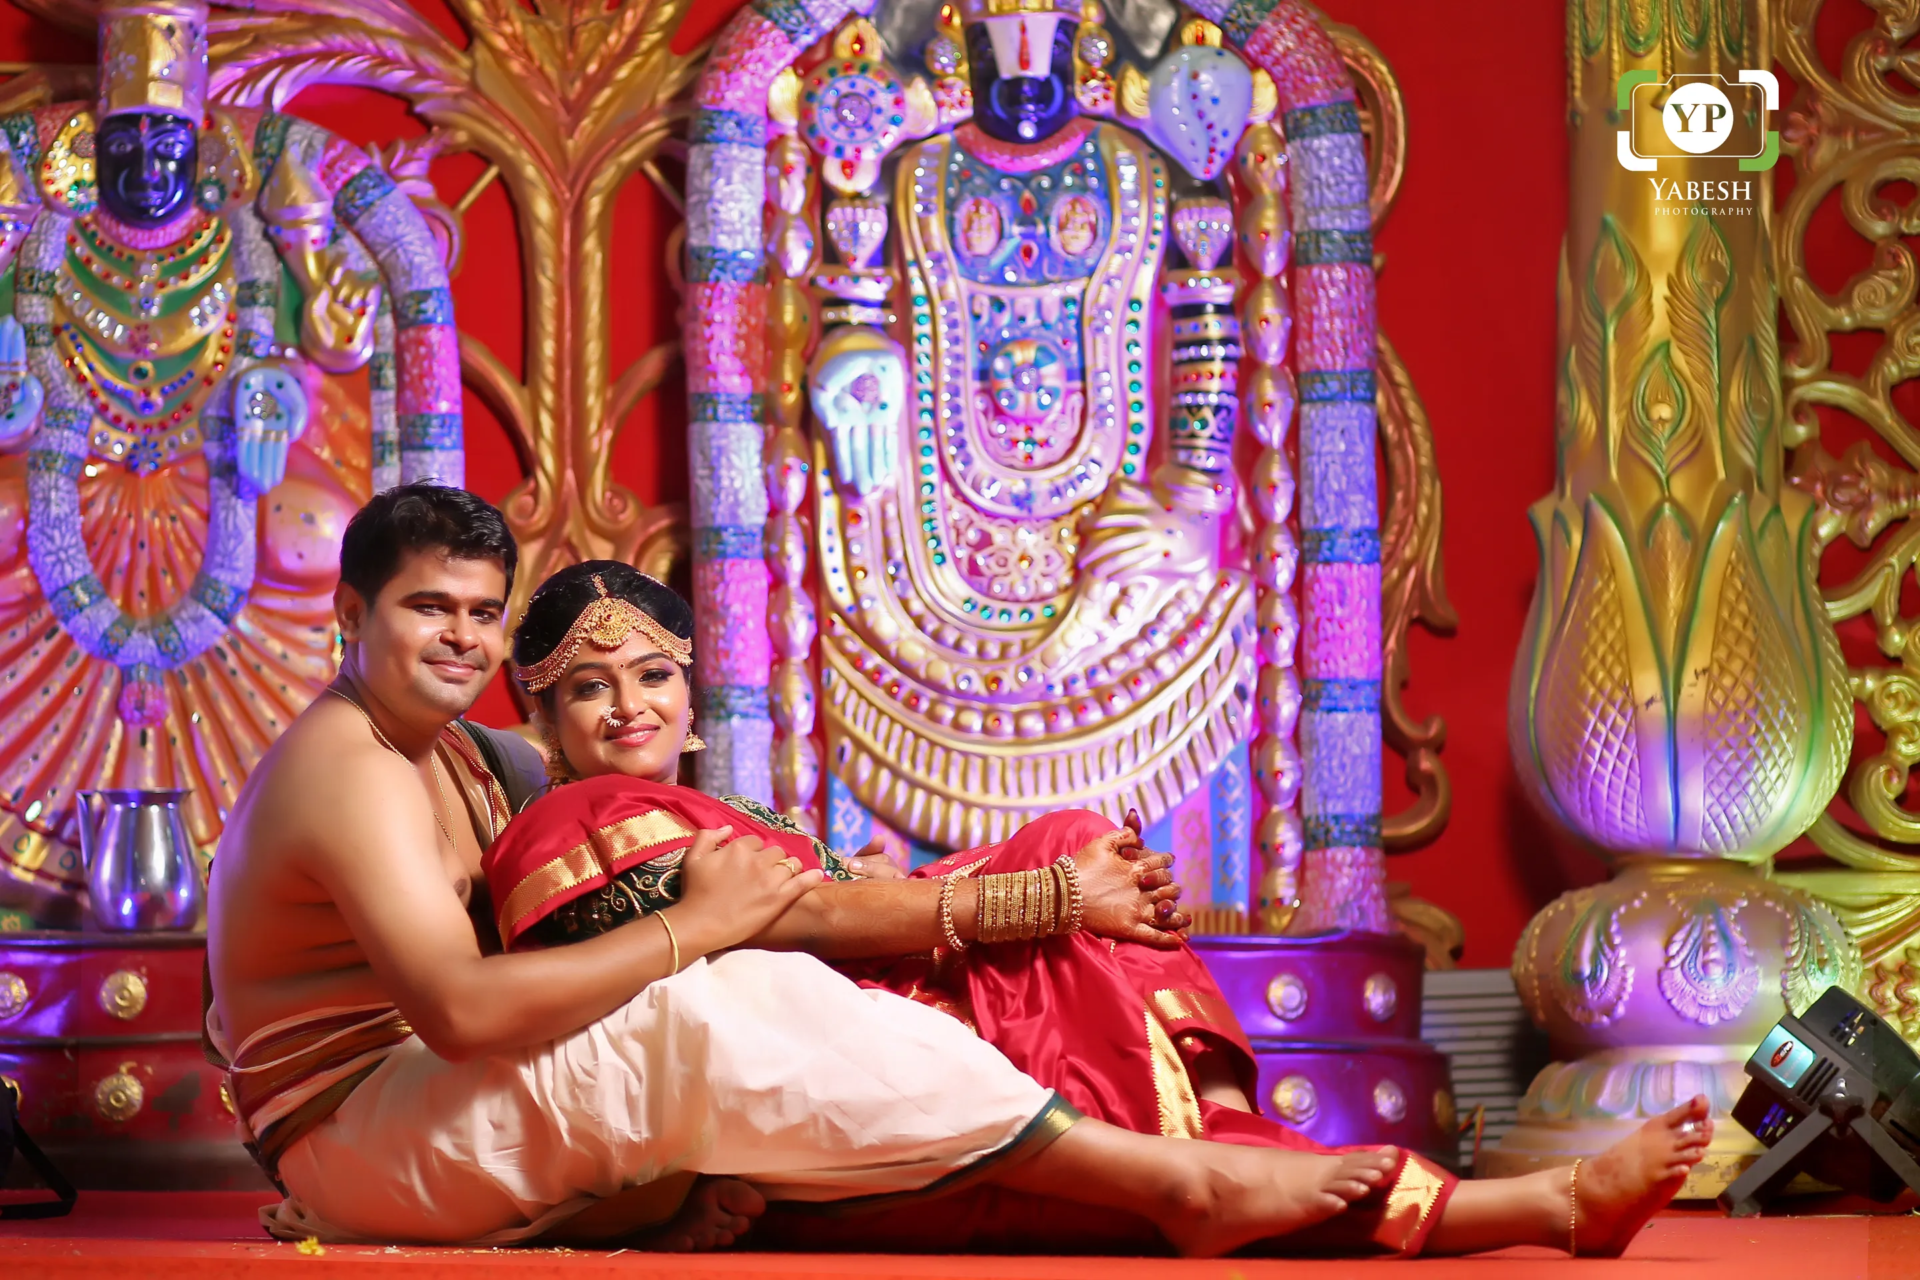 Elegant couple in traditional Brahmin wedding attire, captured by Yabesh Photography during a heartfelt ceremony